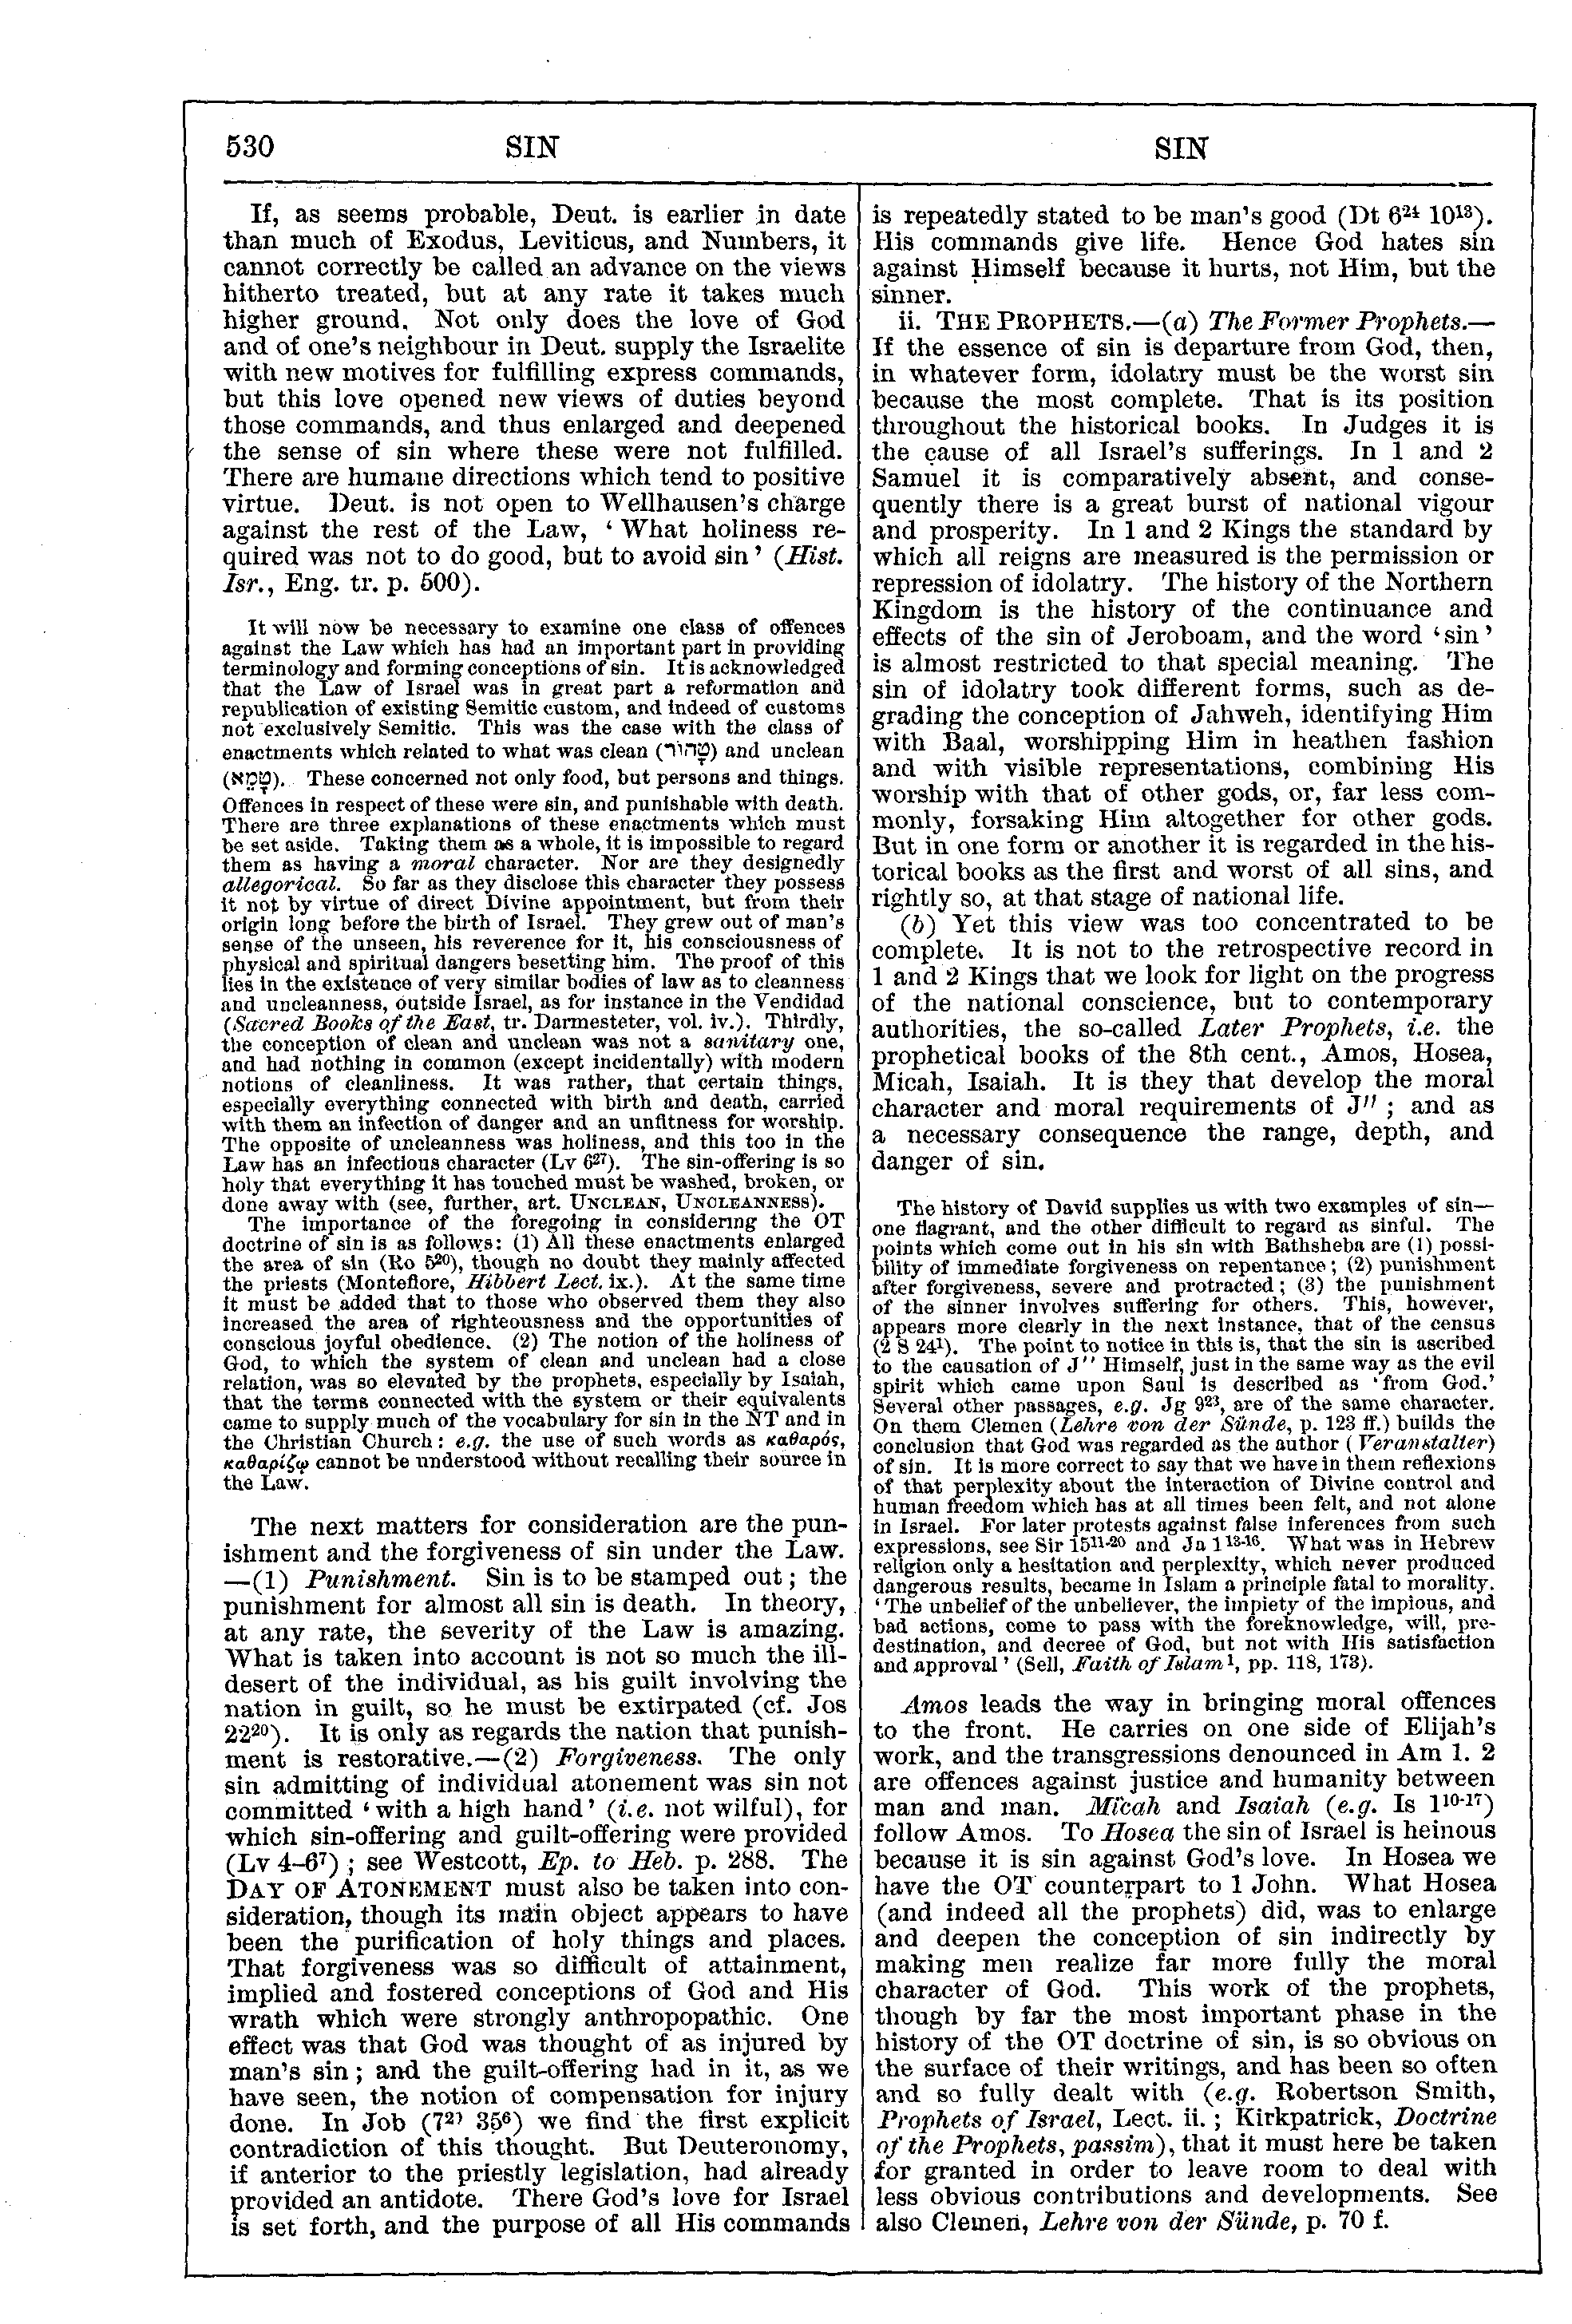 Image of page 530